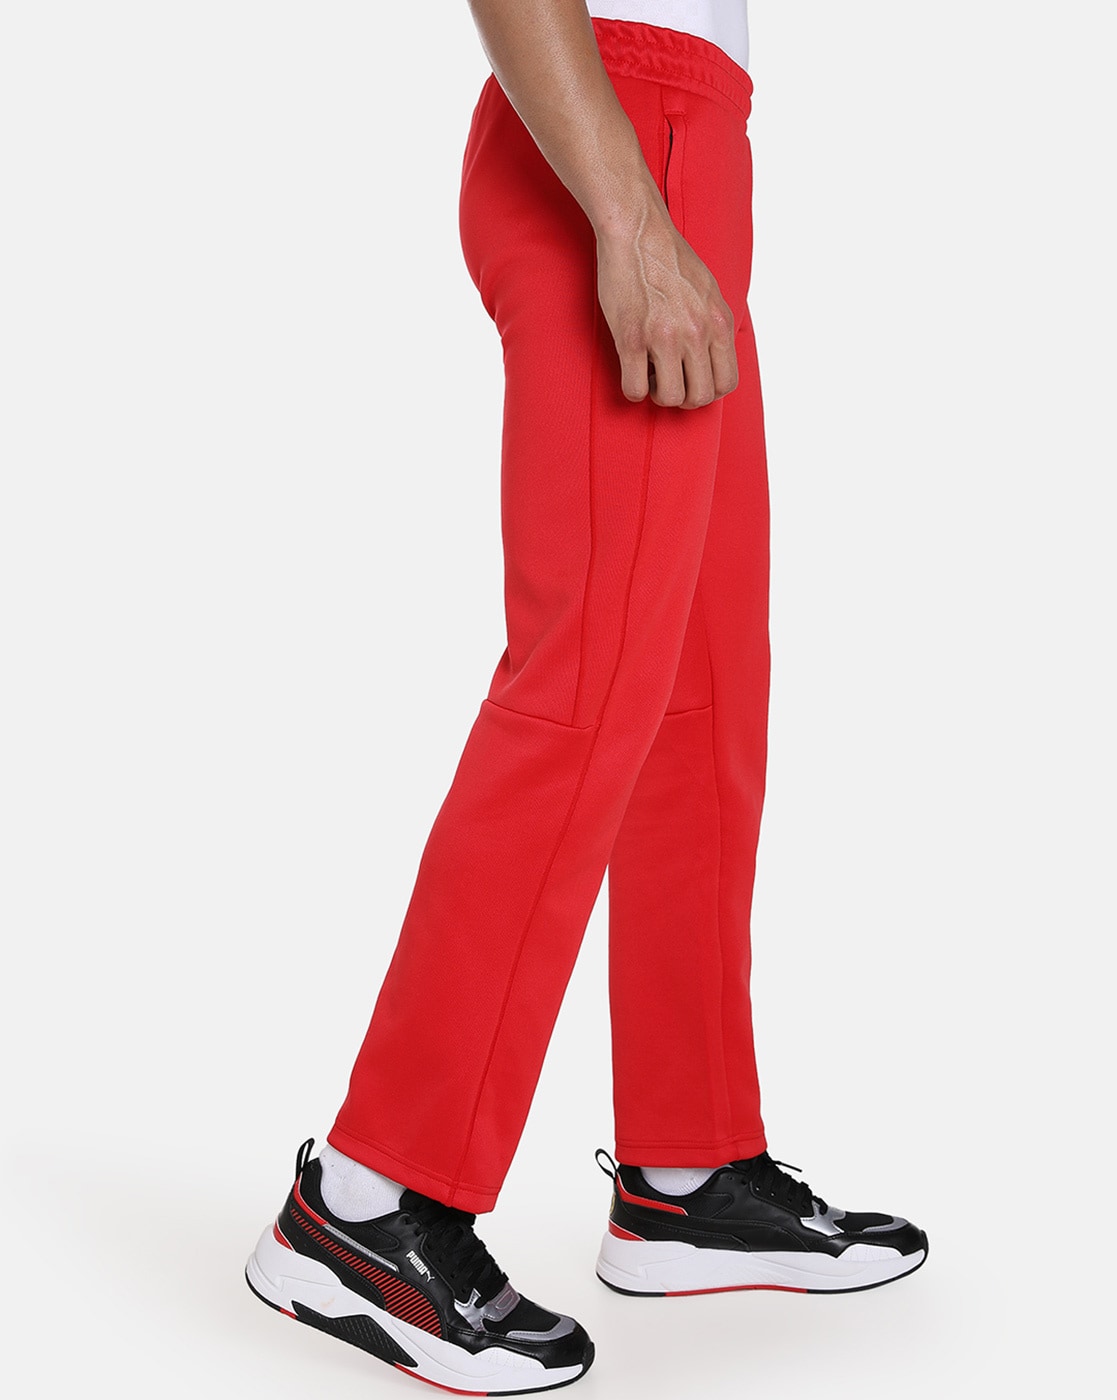 Plain Red CoolWick Bowling Pants - Coolwick Bowling Apparel